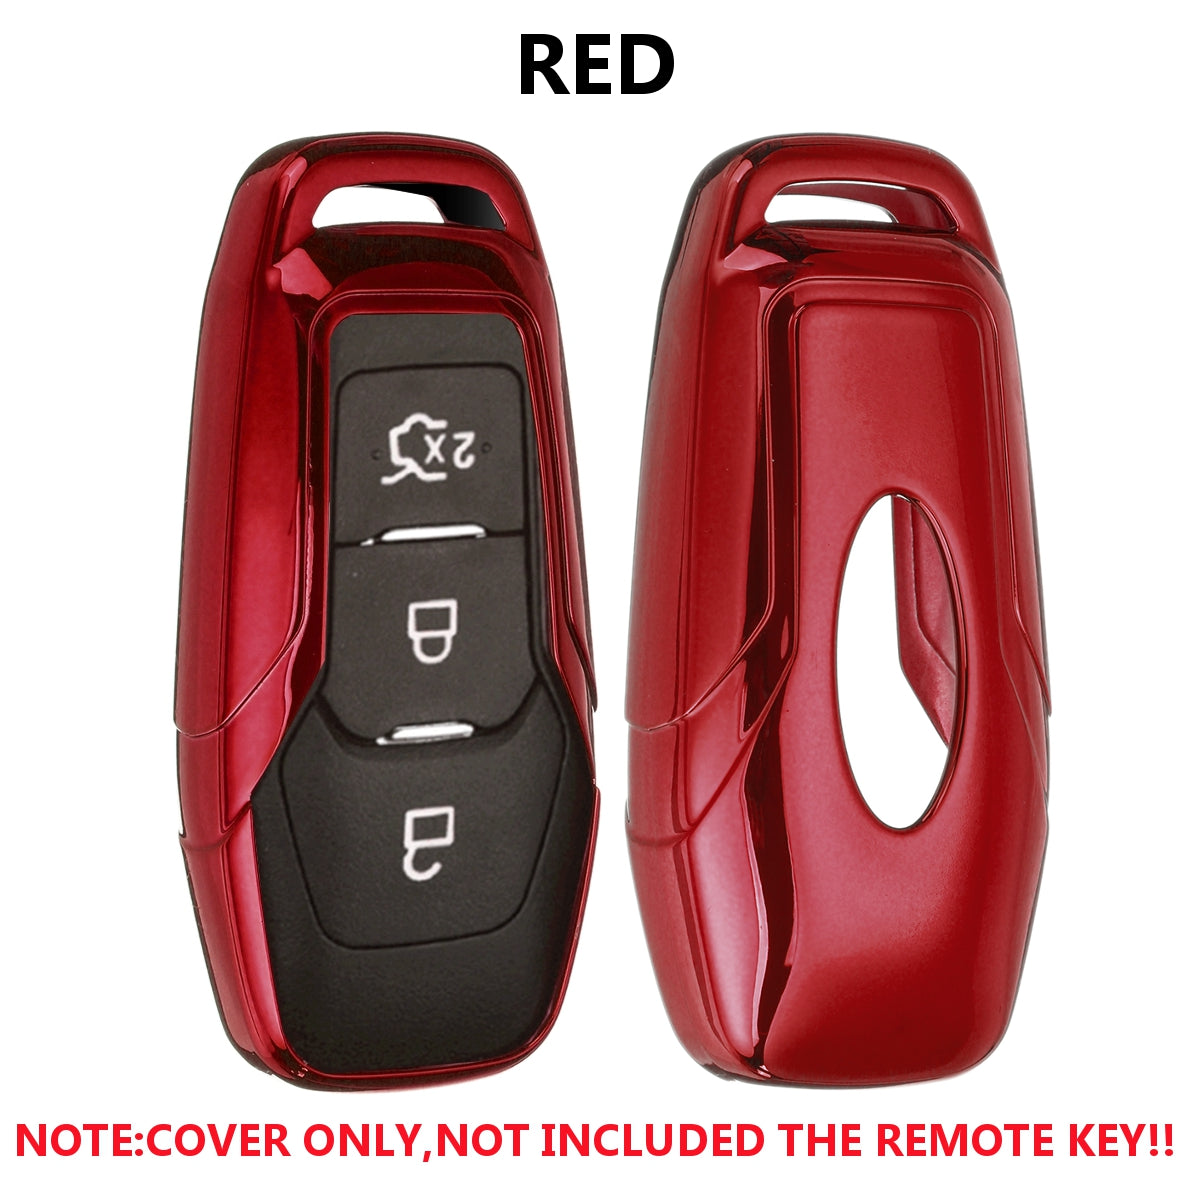 TPU Remote Smart Key Cover Fob Case Shell For Ford Mondeo / Ranger / Explorer / Fiesta ST F15 - Auto GoShop